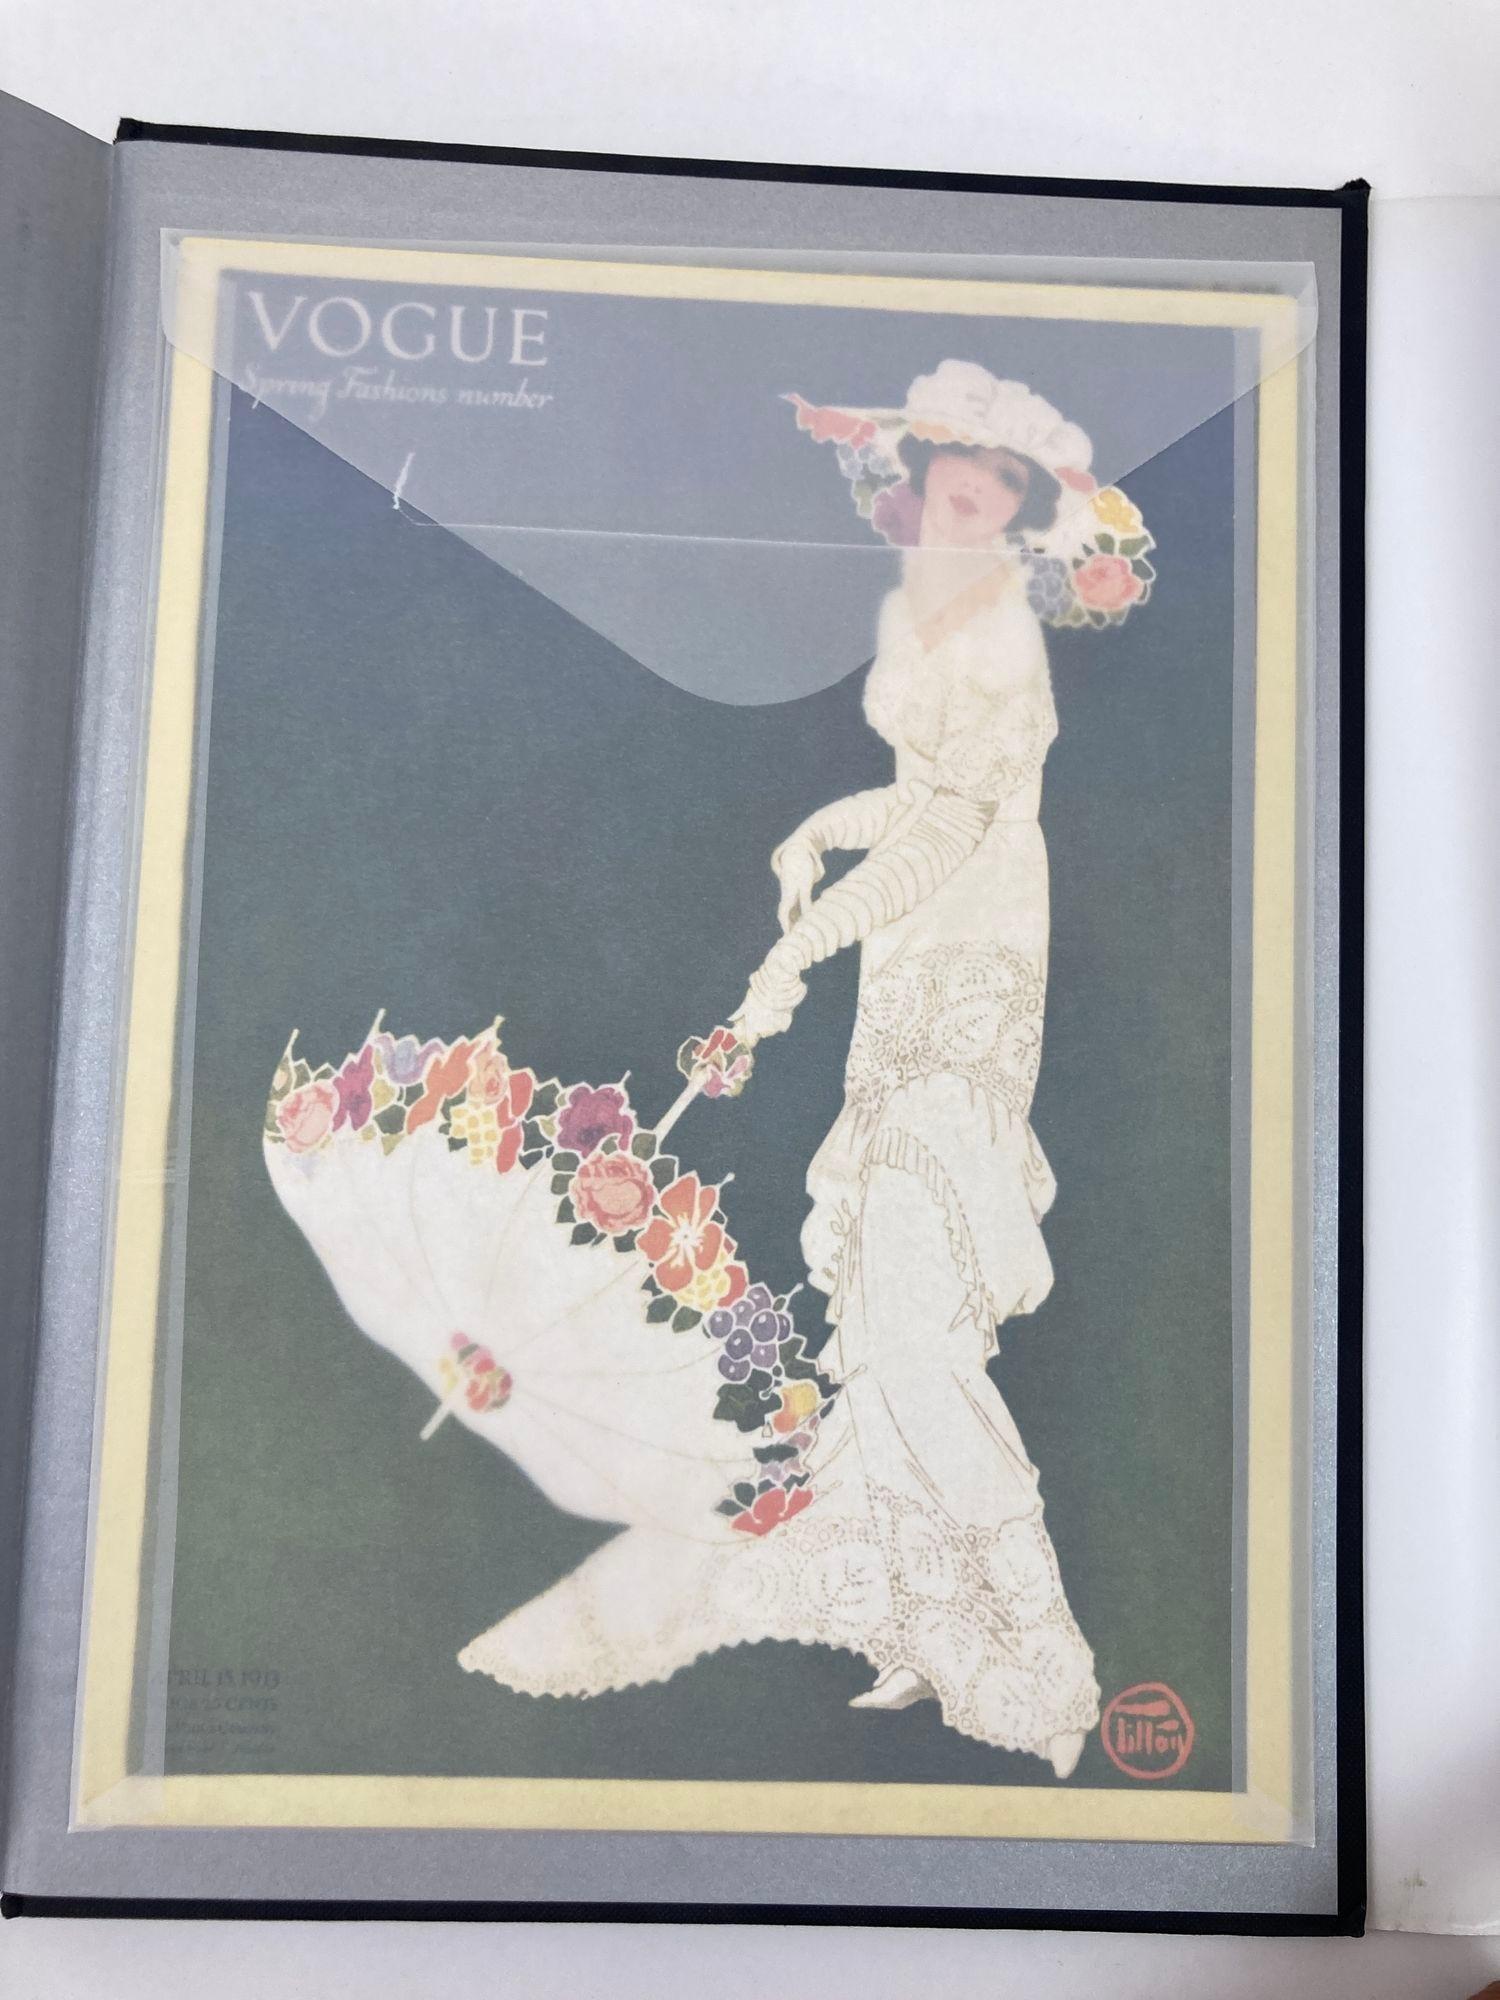 Vogue The Covers Hardcover Coffee Table Book For Sale 9